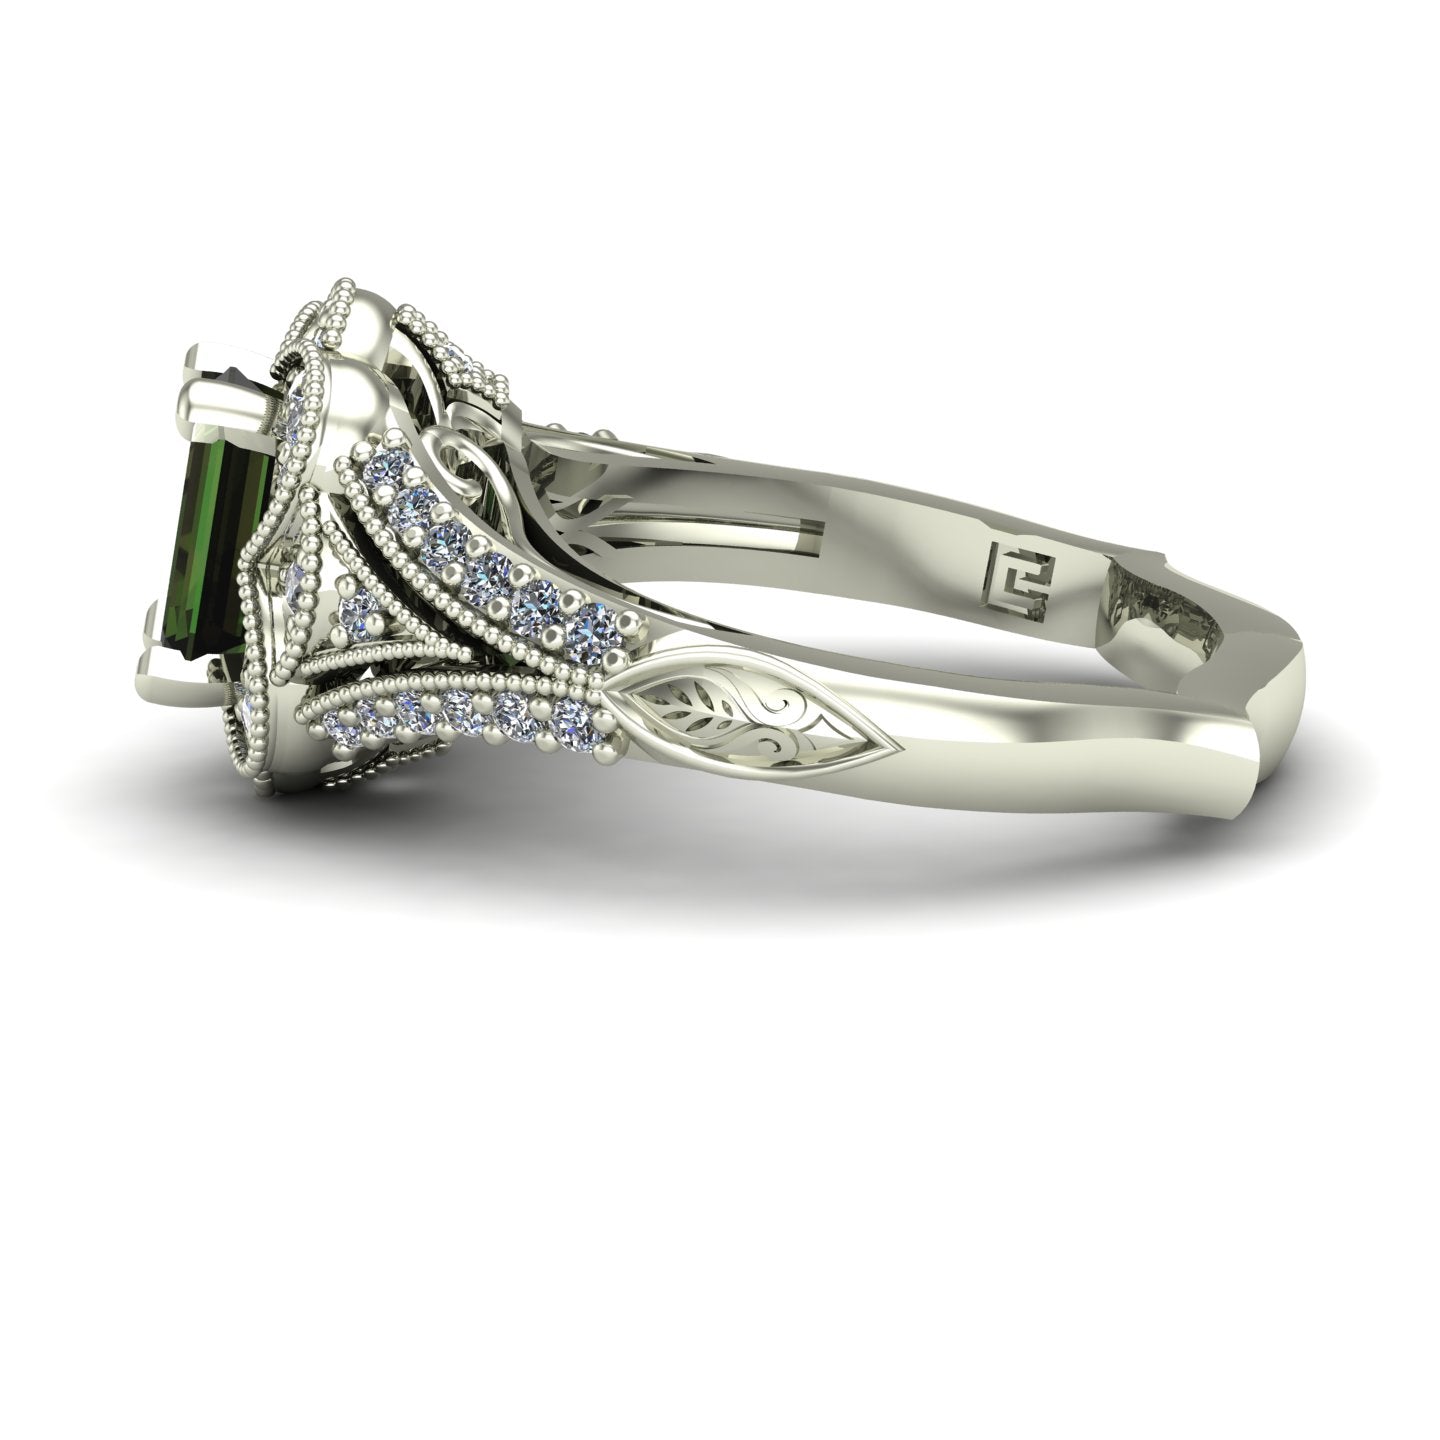 emerald cut green tourmaline and diamond scallop halo ring in 14k white gold - Charles Babb Designs - side view